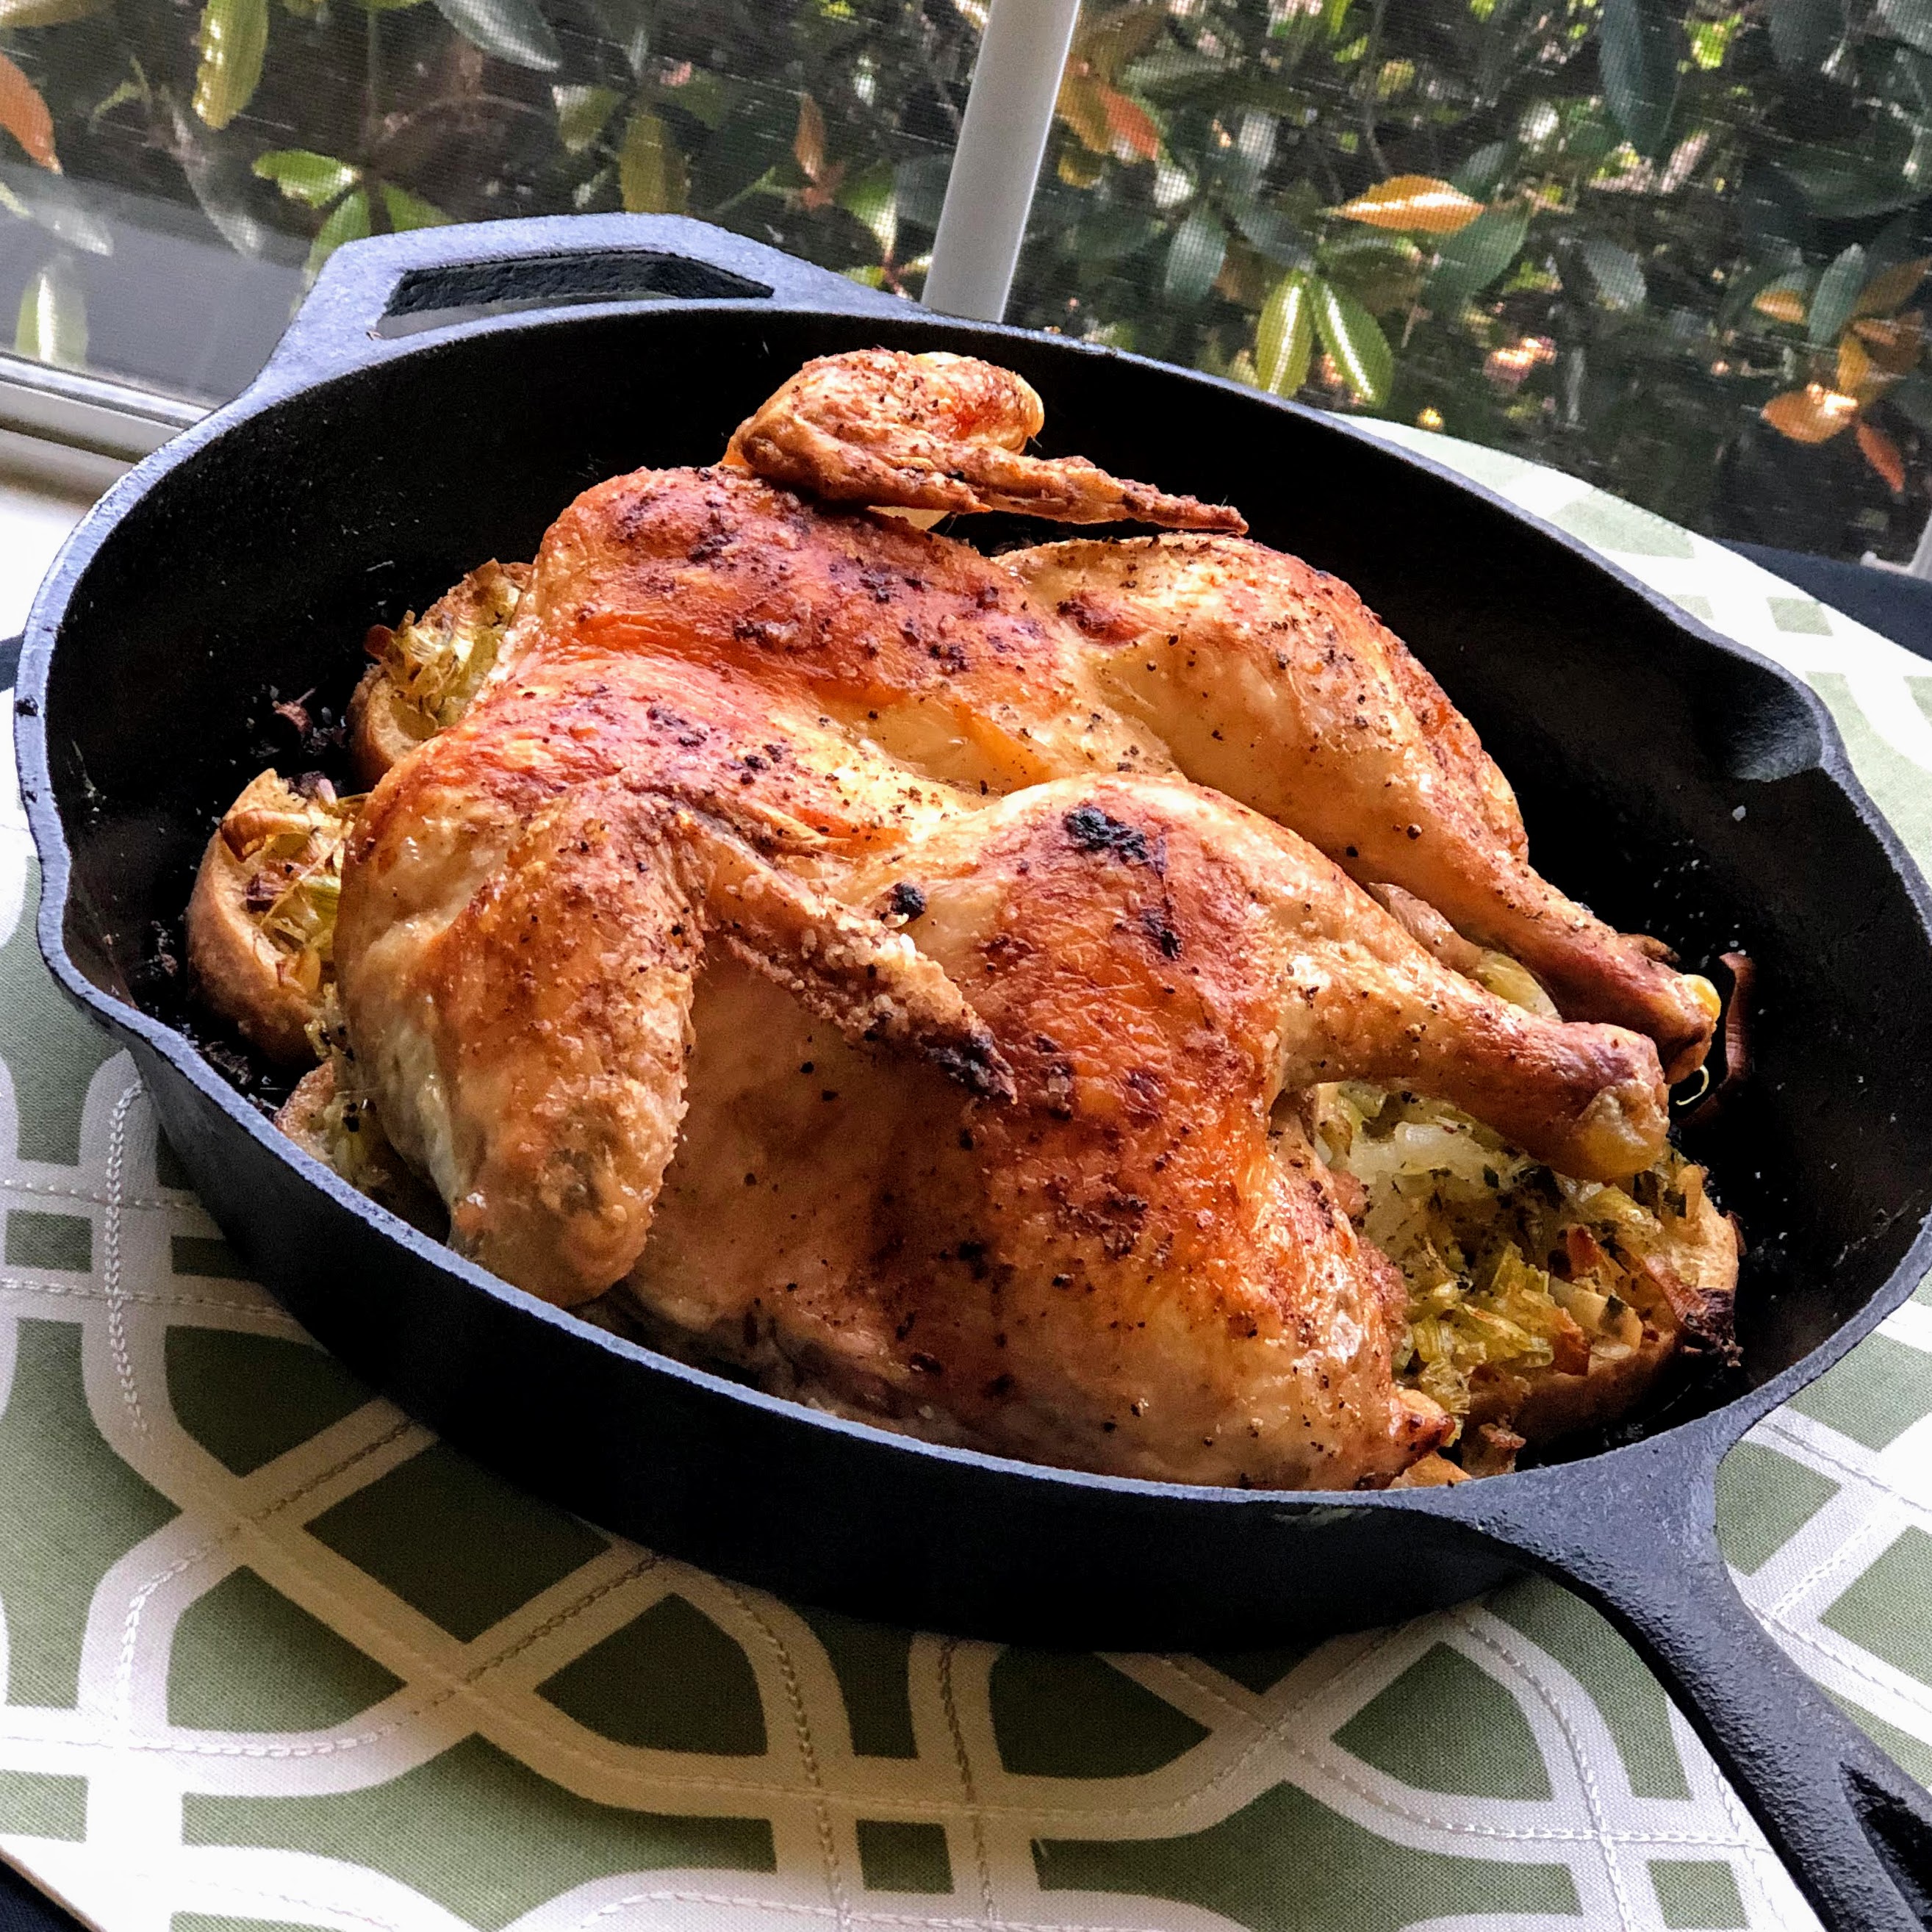 Roast Chicken With Skillet Stuffing Recipe Allrecipes,Dream House Modern House Designs Pictures Gallery